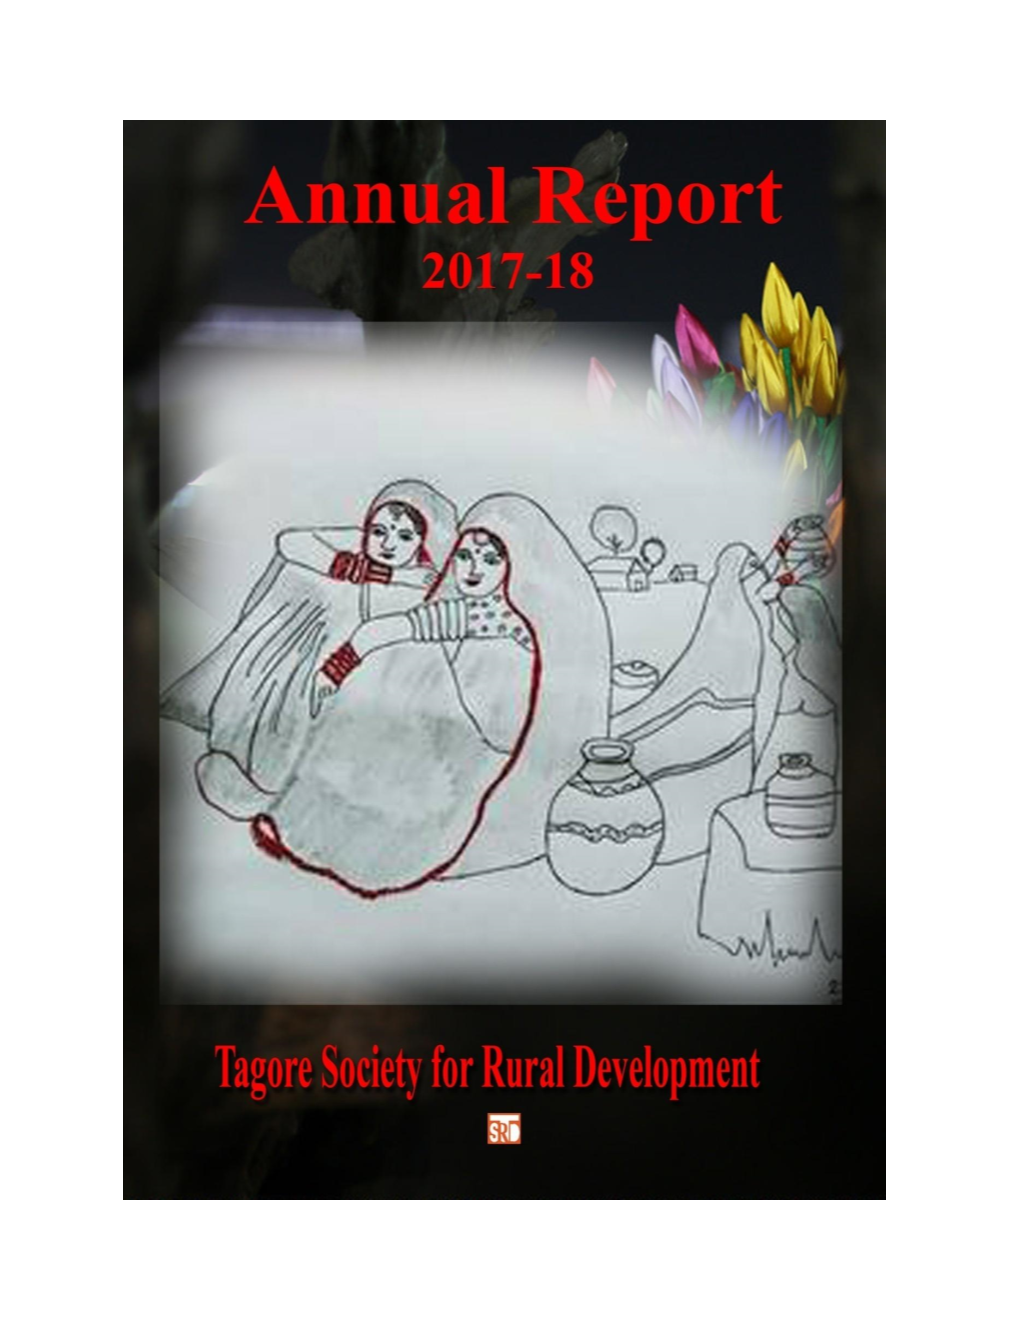 To Download Annual Report of 2017-2018